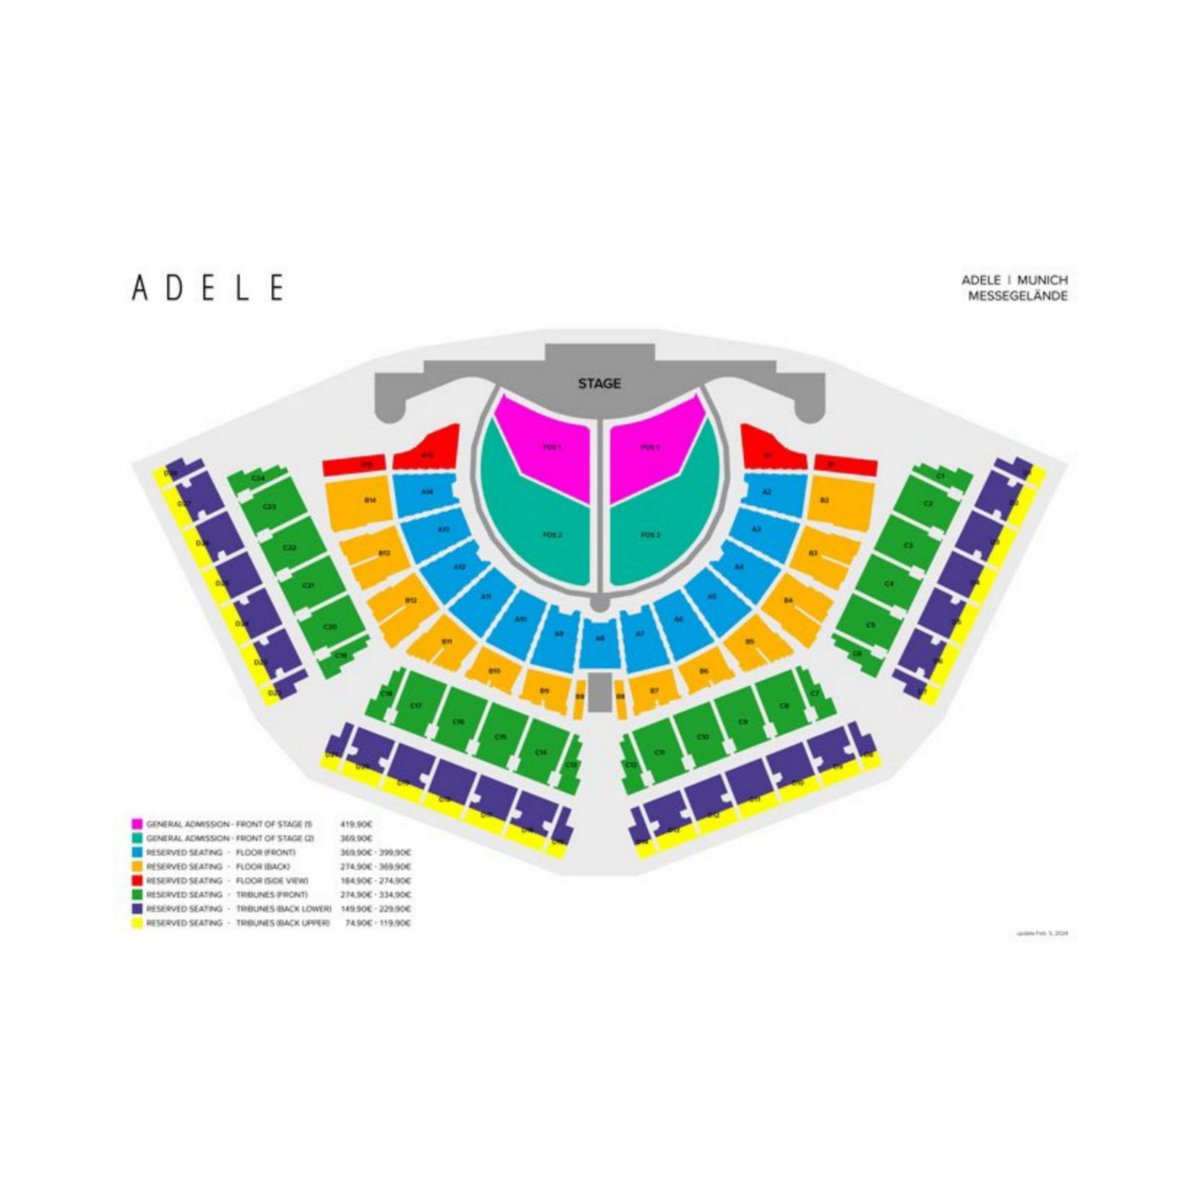 Ticketmaster has released the map of Adele in Munich with prices ranging between €74.90 and €419.90. — Pre-sale starts tomorrow. #AdeleInMunich